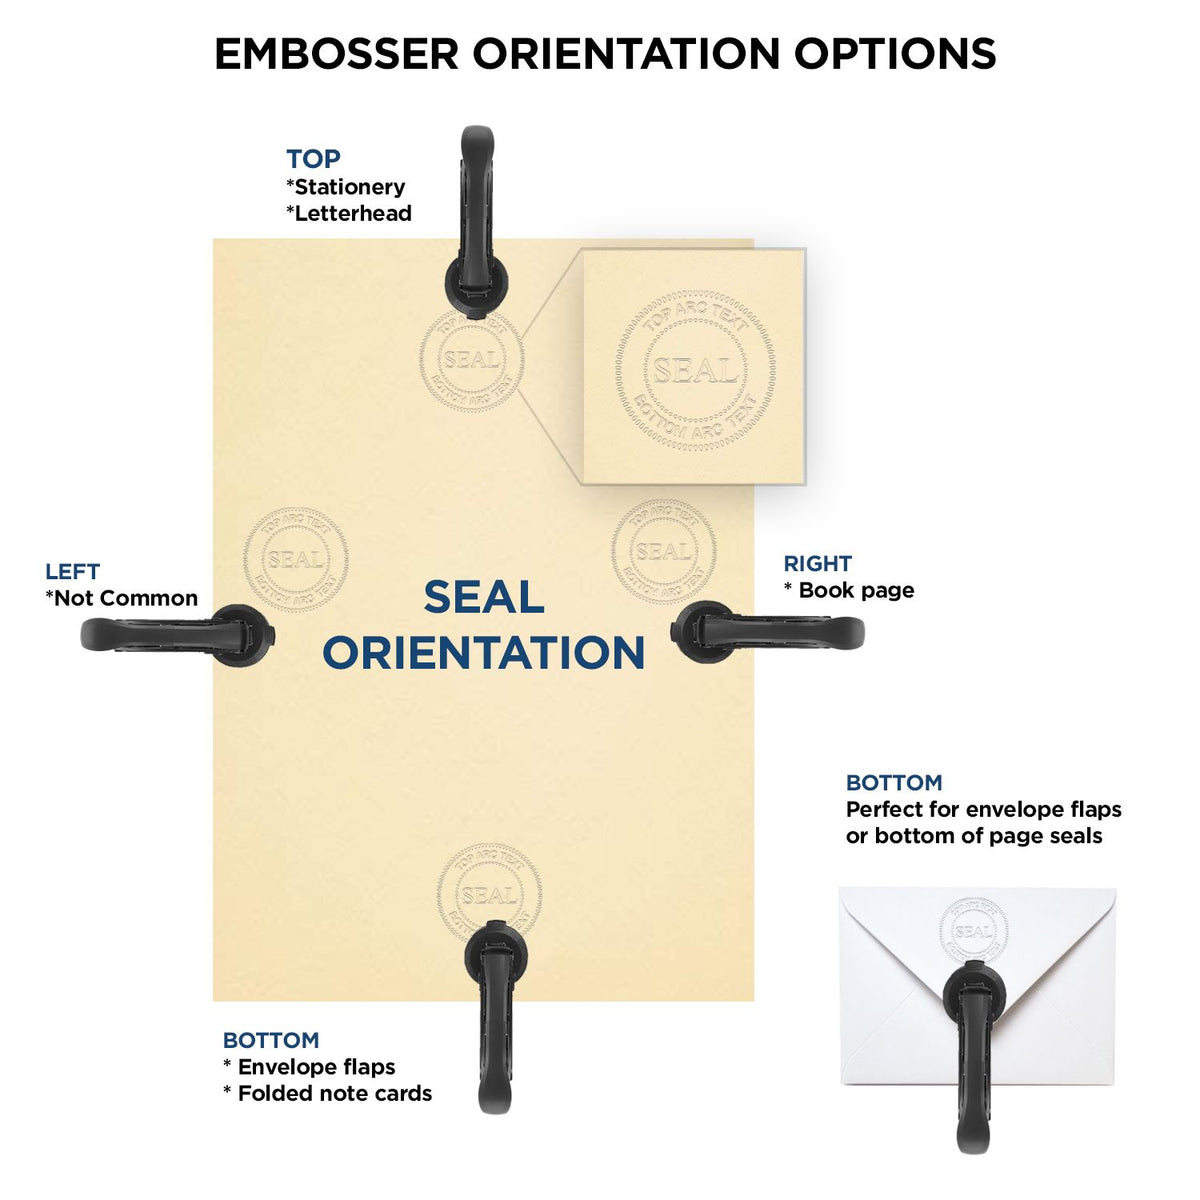 An infographic for the Gift South Dakota Engineer Seal showing embosser orientation, this is showing examples of a top, bottom, right and left insert.